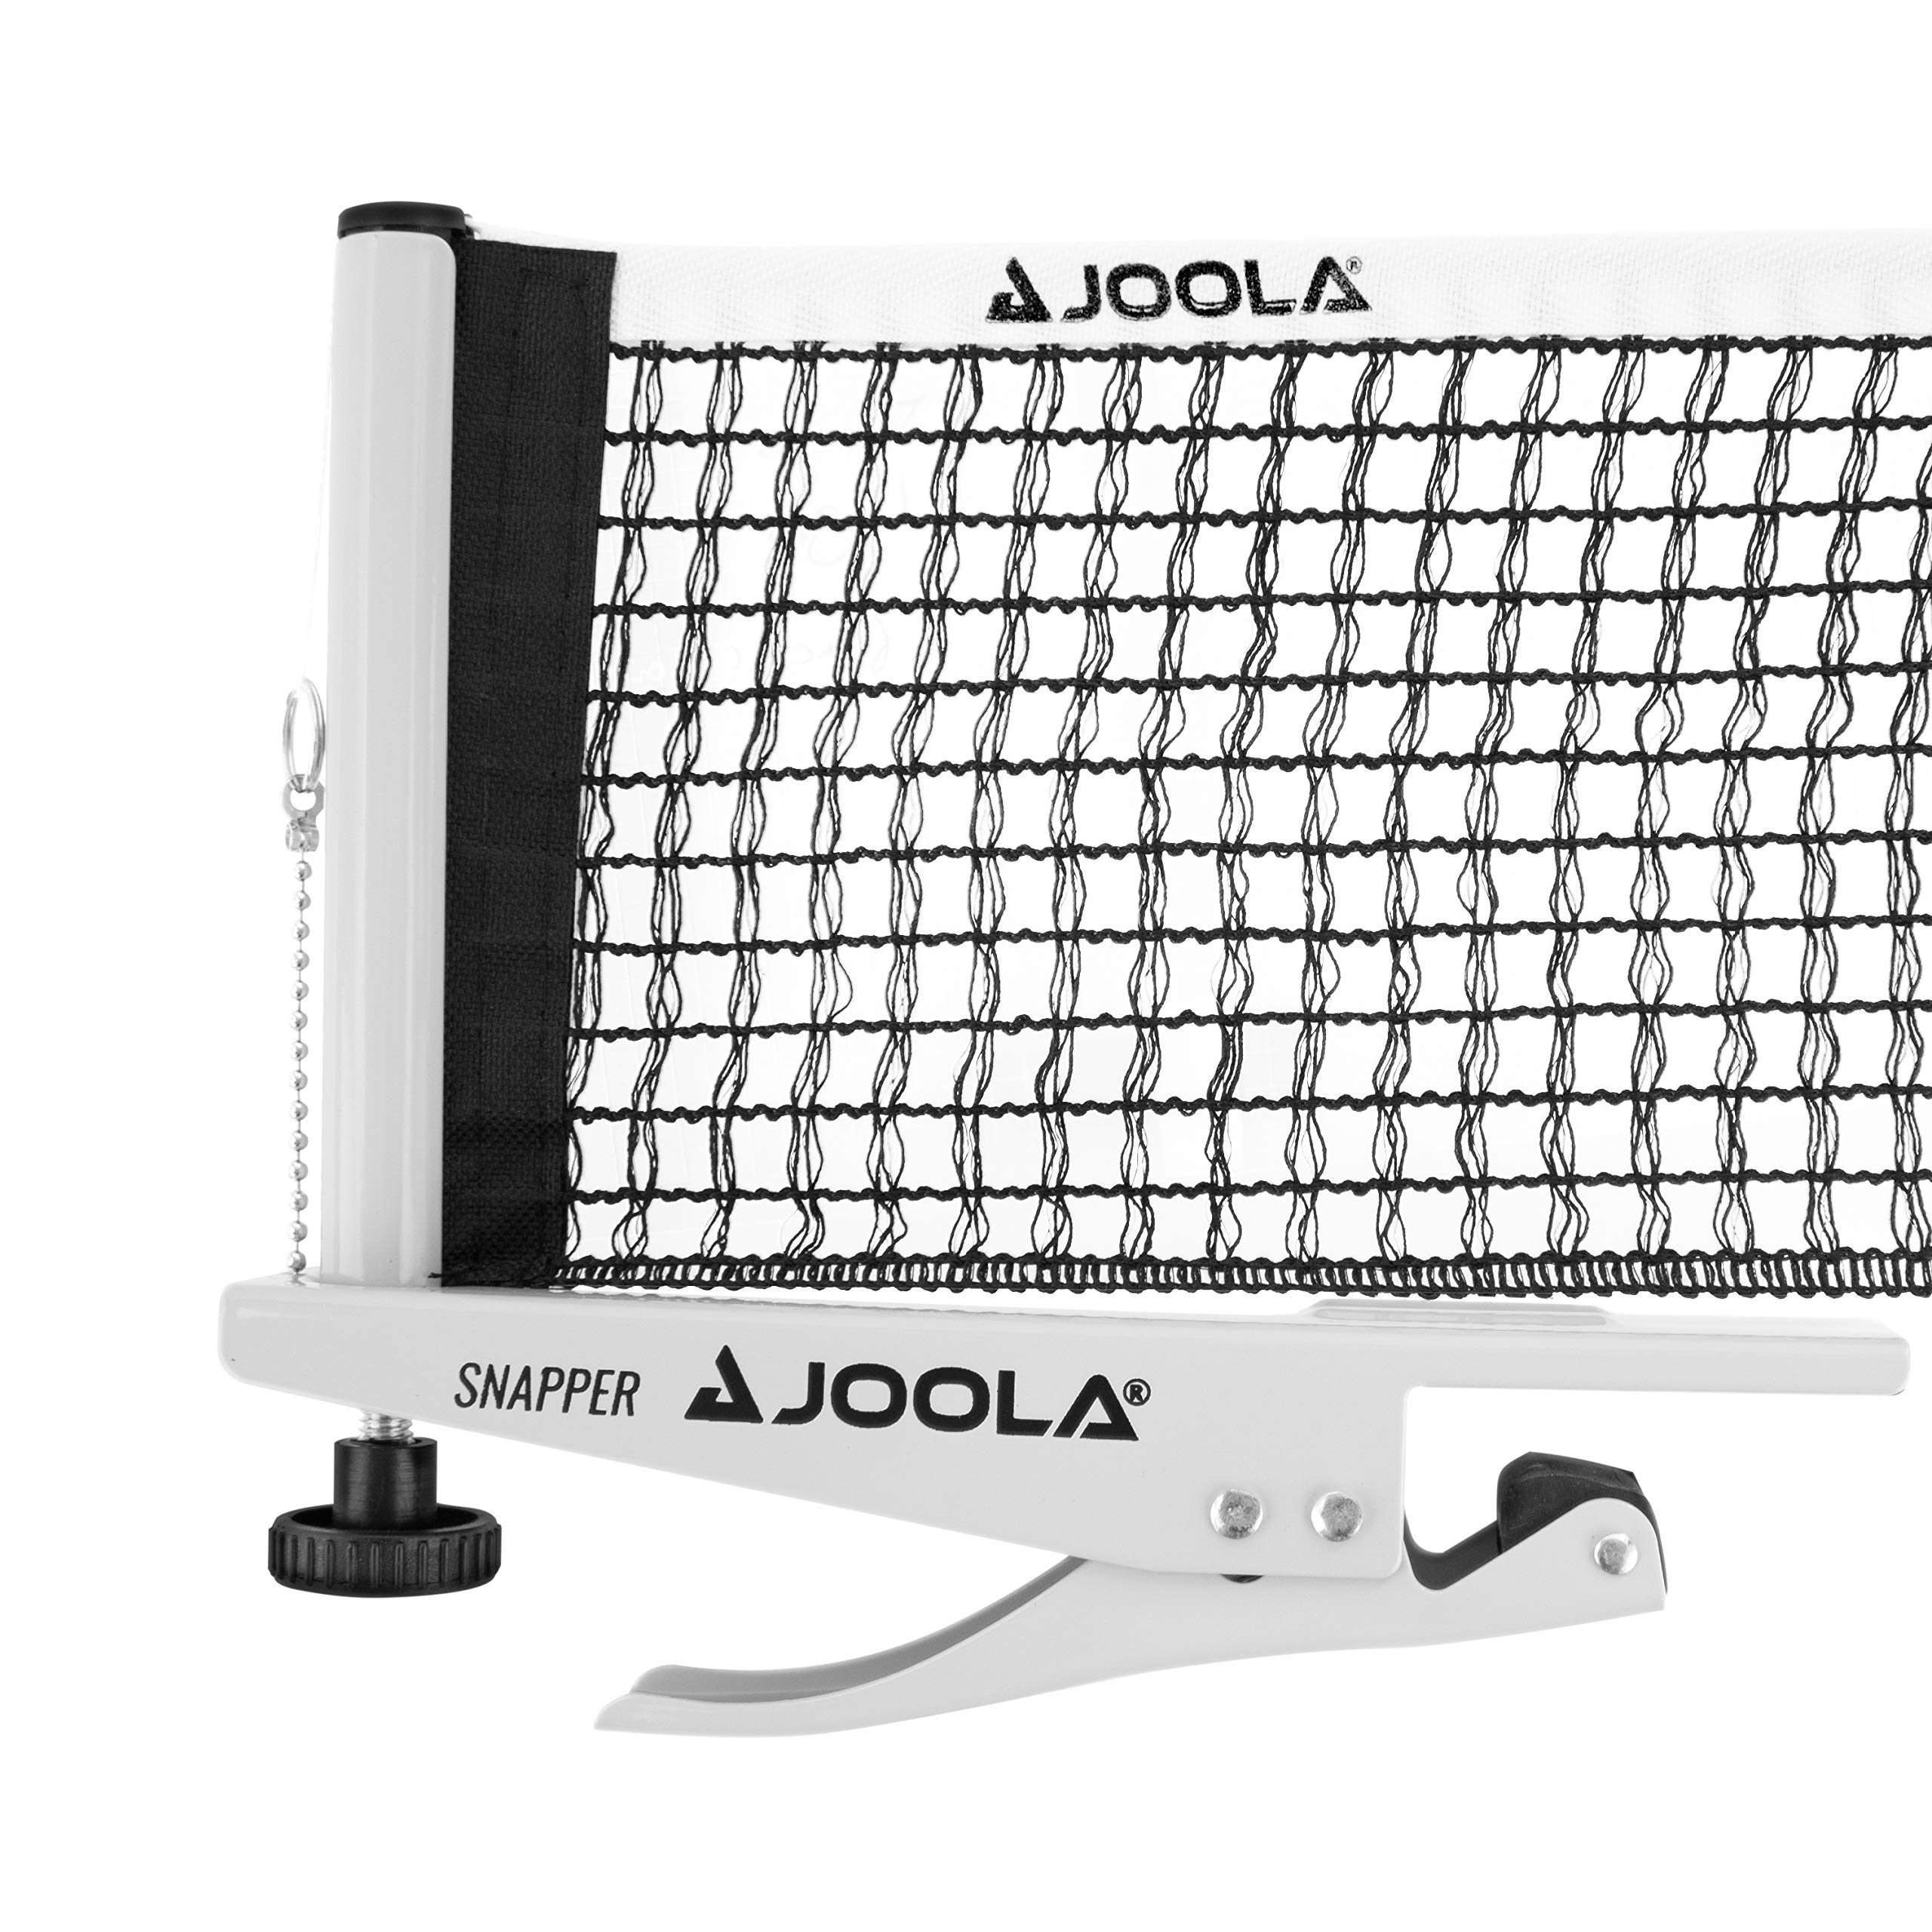 Joola Snapper Professional Table Tennis Net And Post Set - Portable And Easy Setup 72 Regulation Size Ping Pong Spring Activated